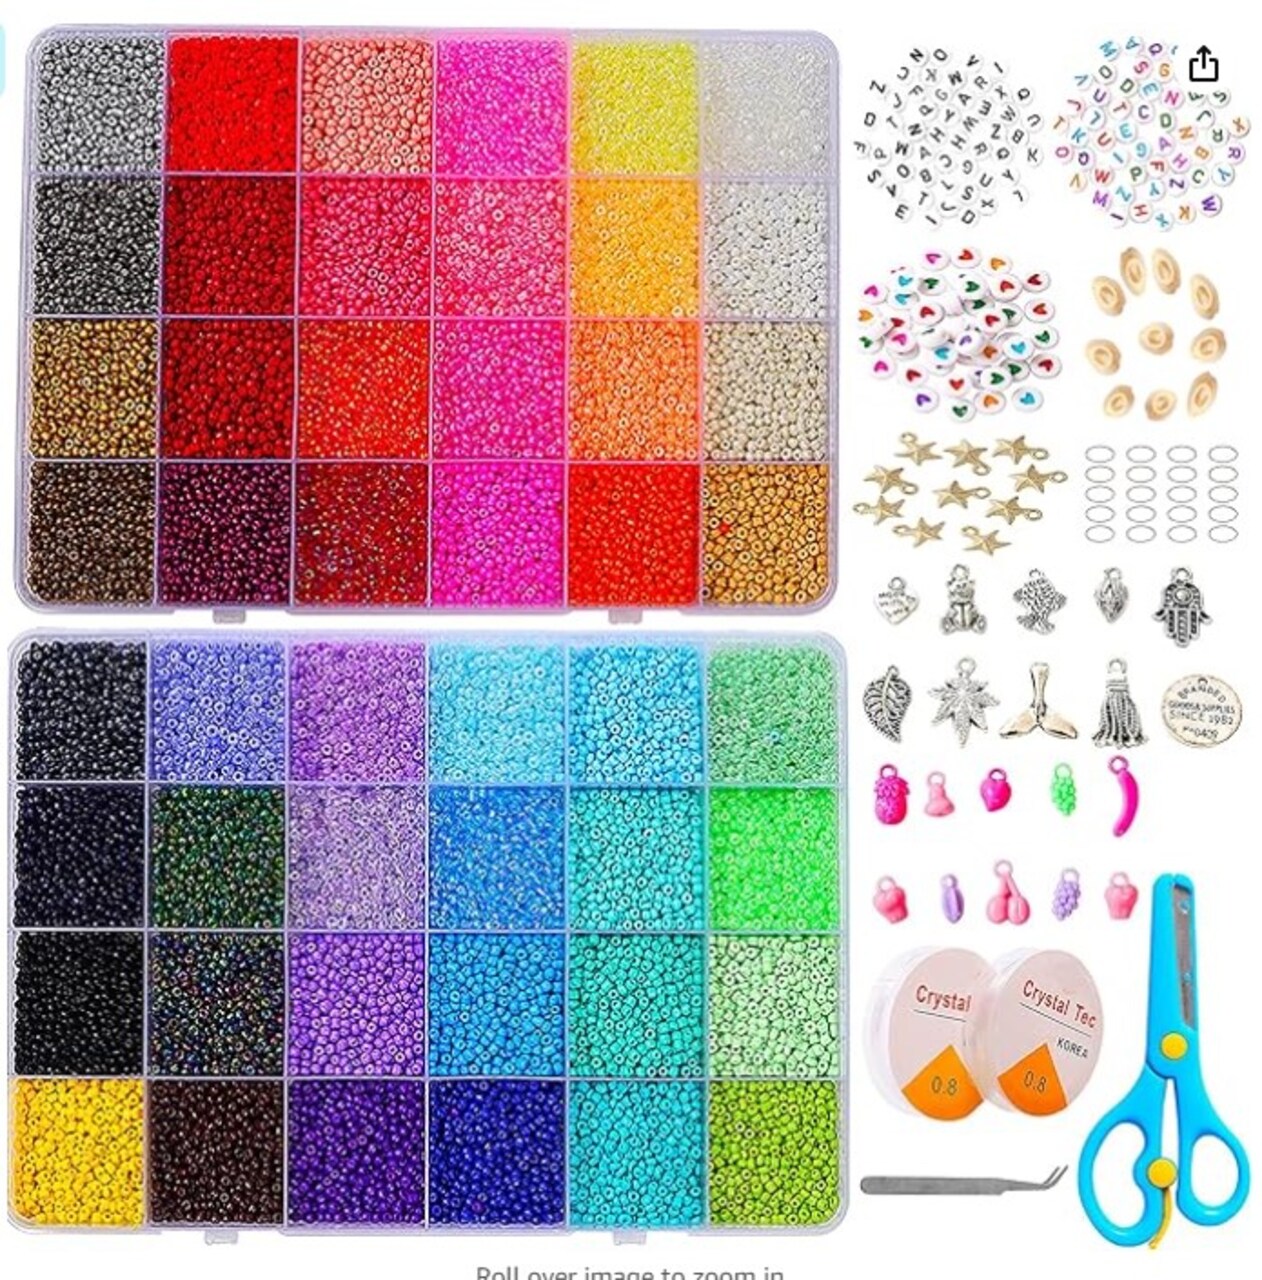 36000+pcs 2mm 48 Colors Glass Seed Beads for Bracelet Jewelry Making Kit,  Adults Girls Small Beads Kit for Necklace Ring Making